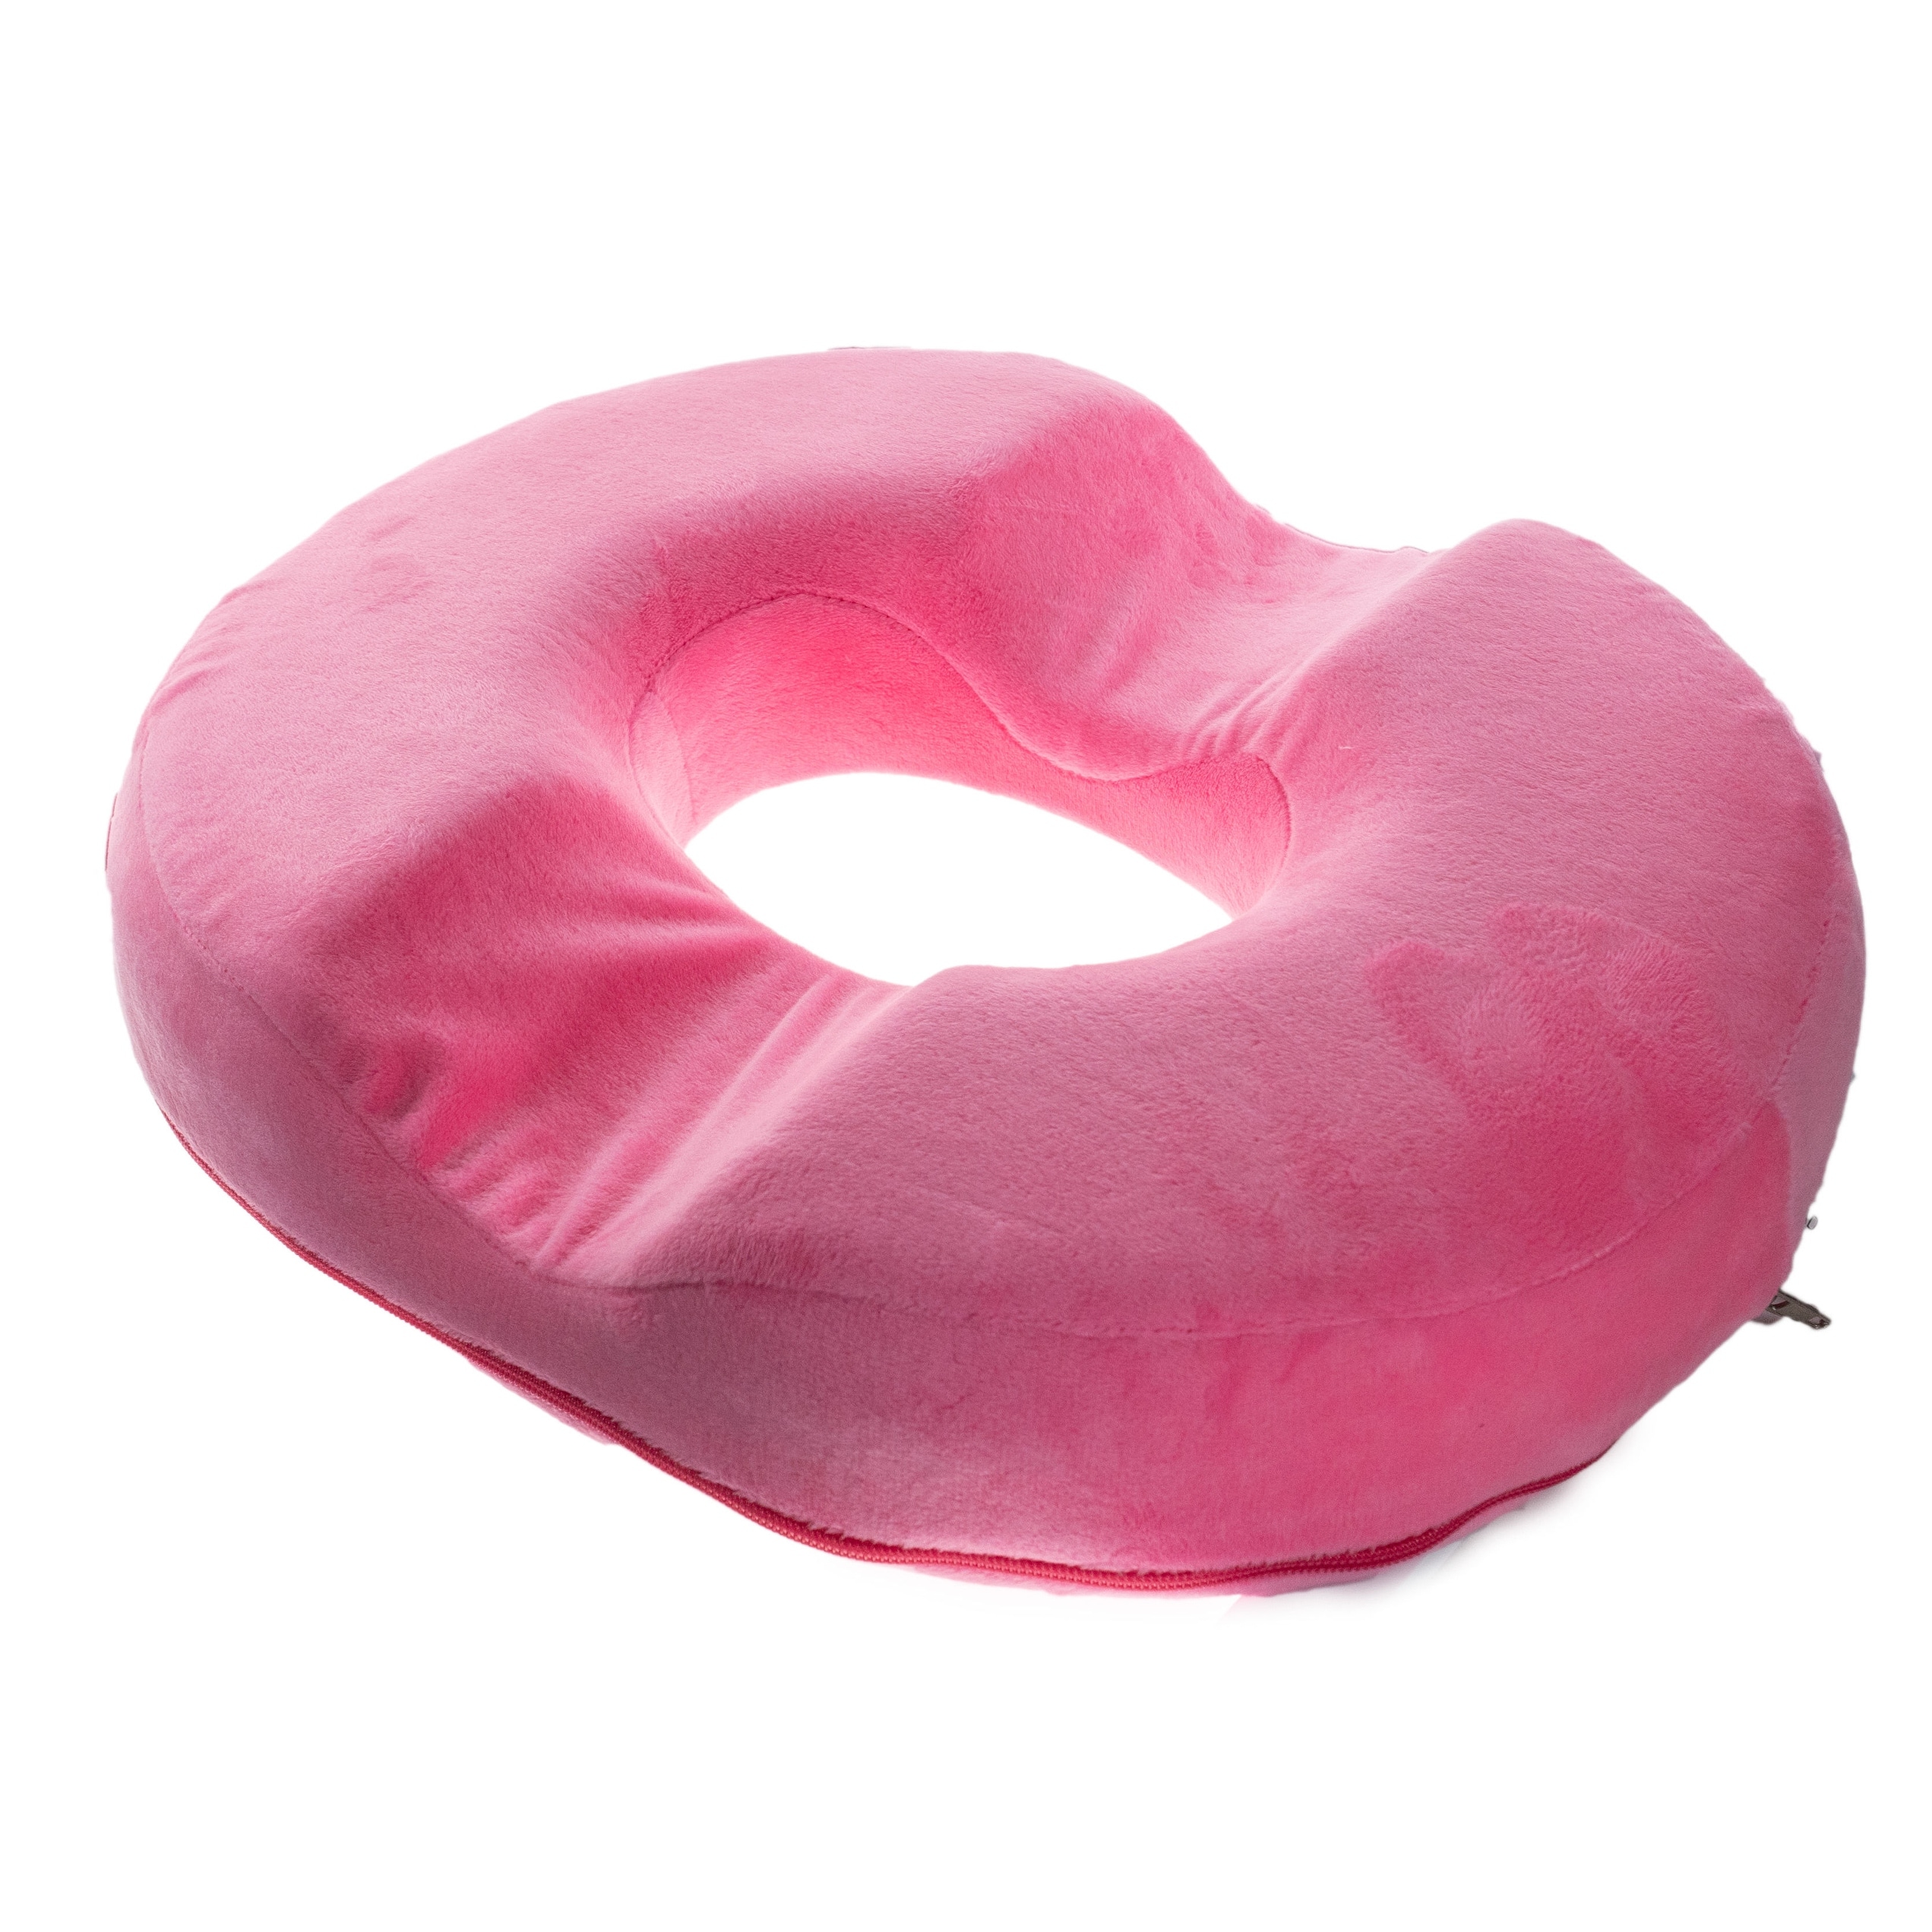 Orthopedic Donut Seat Cushion with Cooling Gel Infused Memory Foam